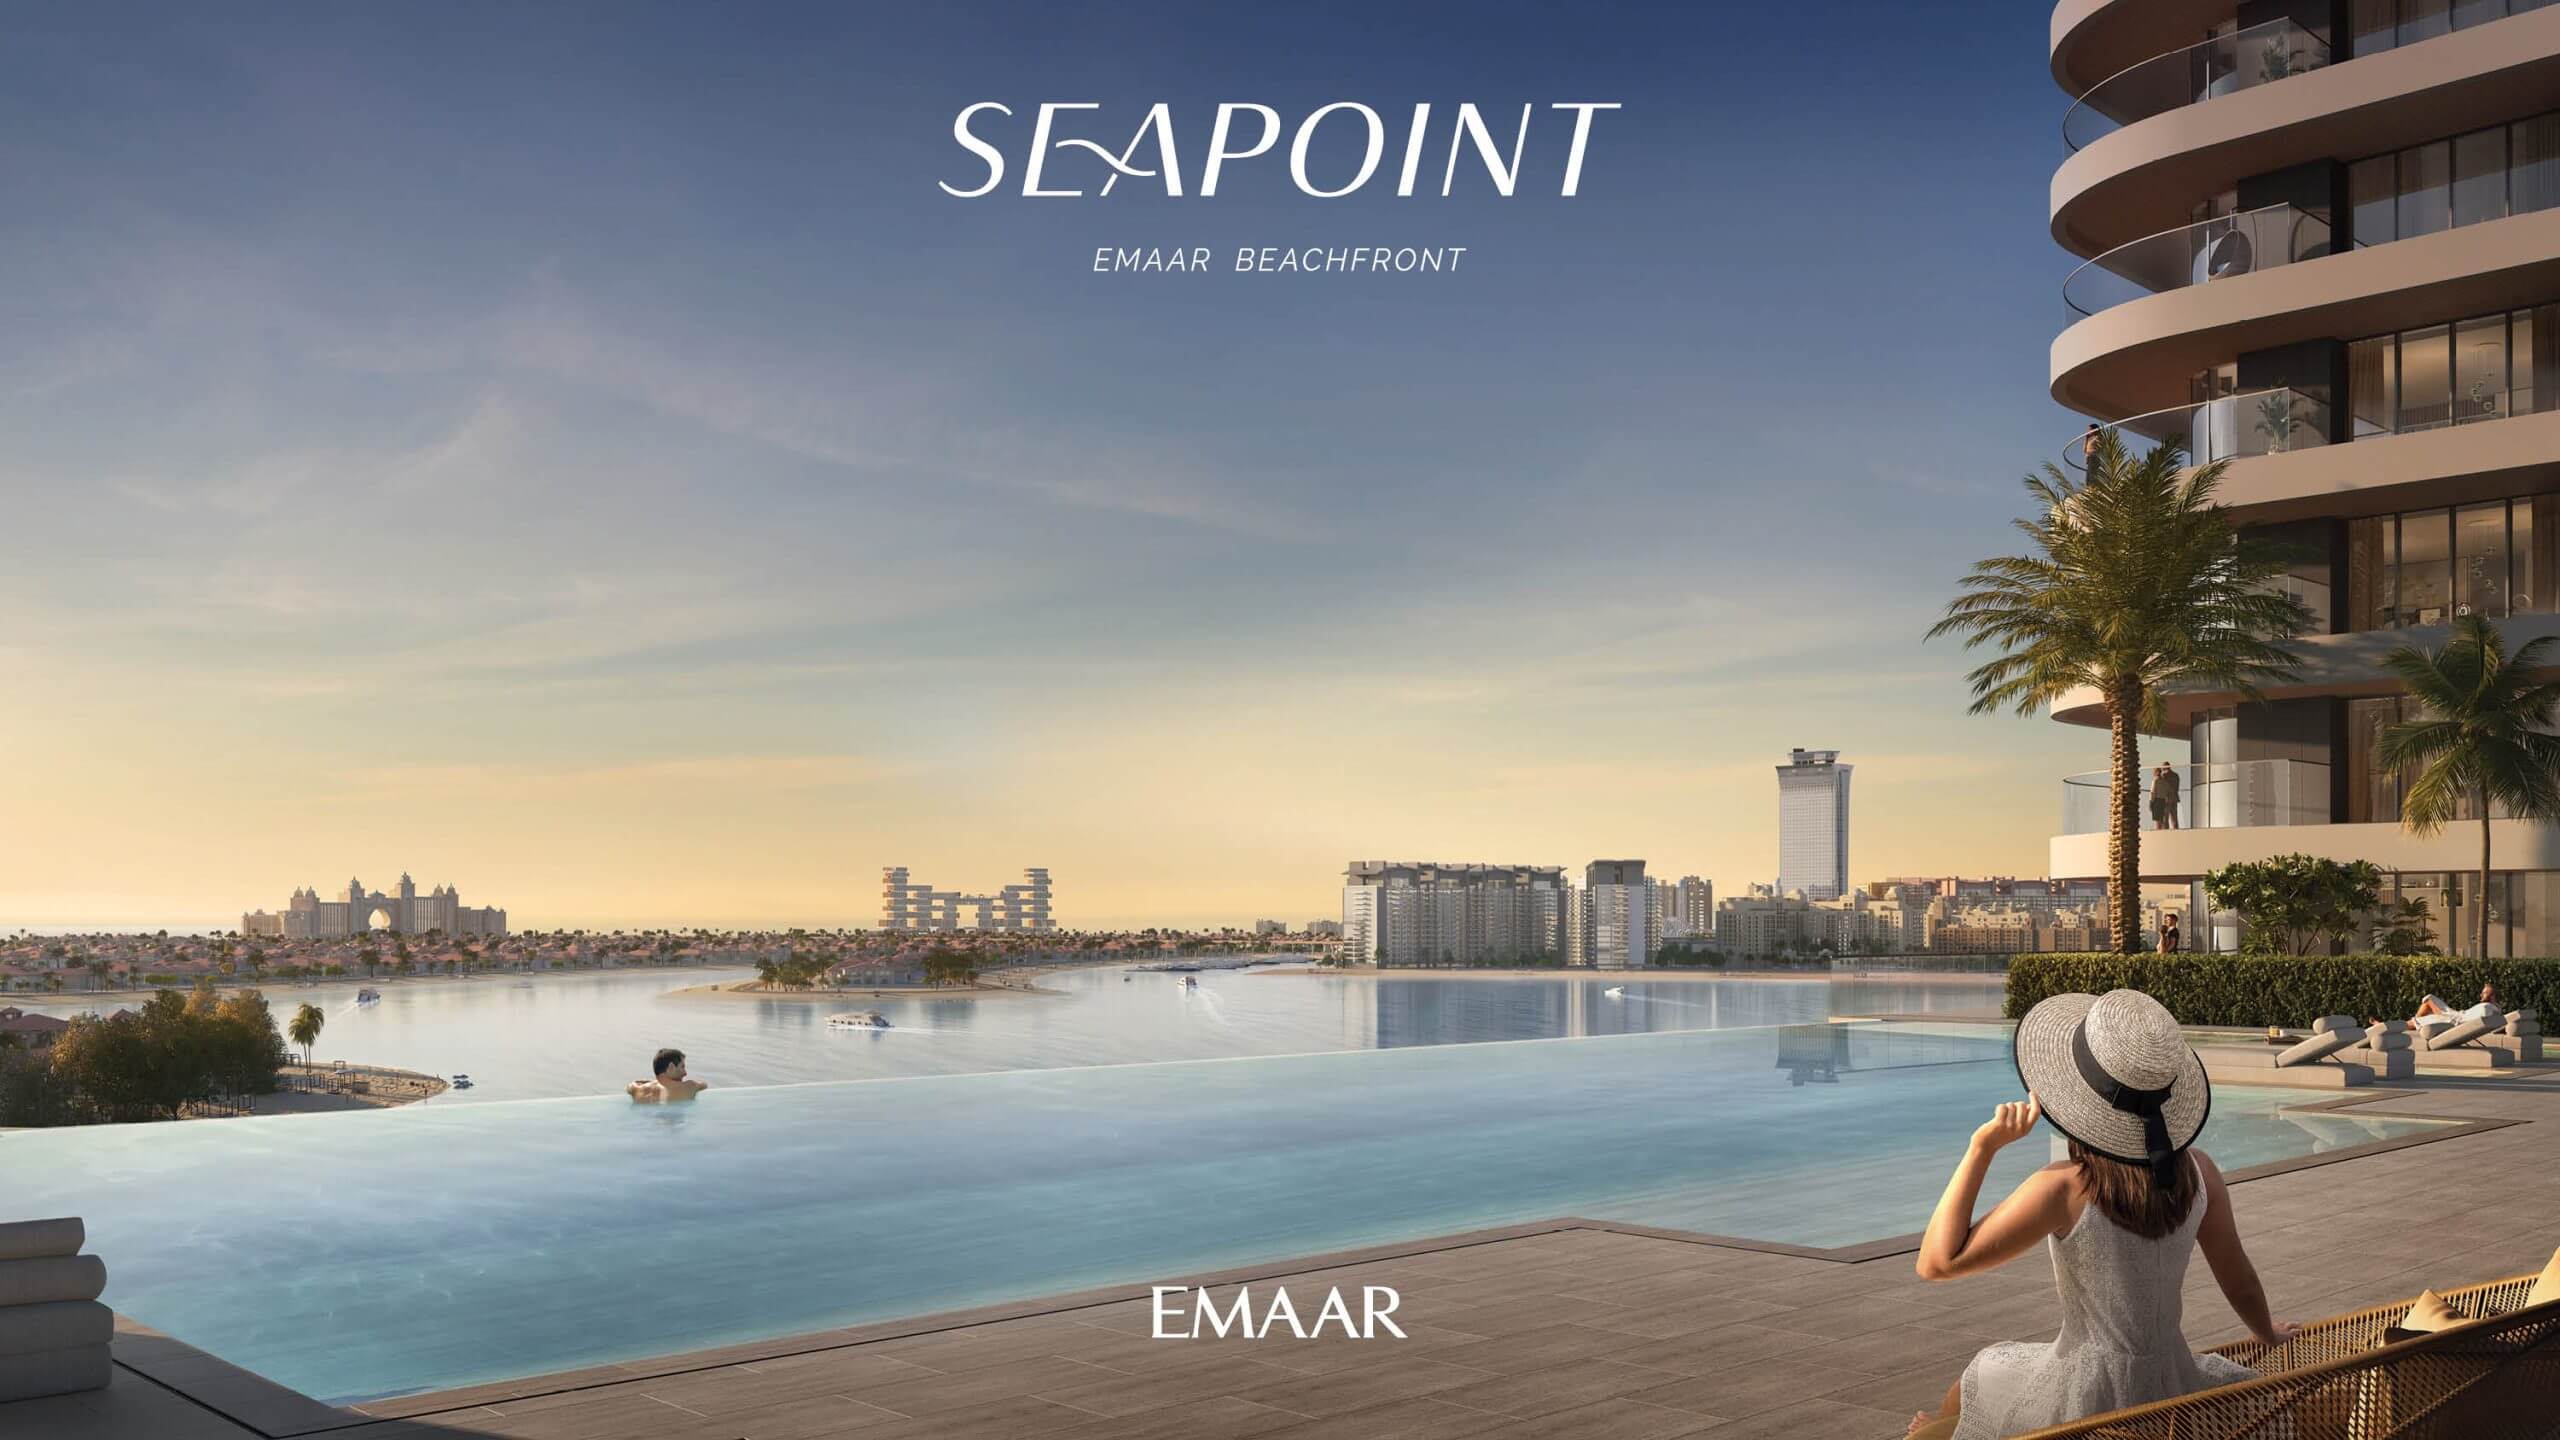 Seapoint Emaar Beachfront Properties in Dubai by PJ International Estate Agency - Exclusive waterfront living with stunning views. Explore luxury homes and residences in this prime beachfront location.